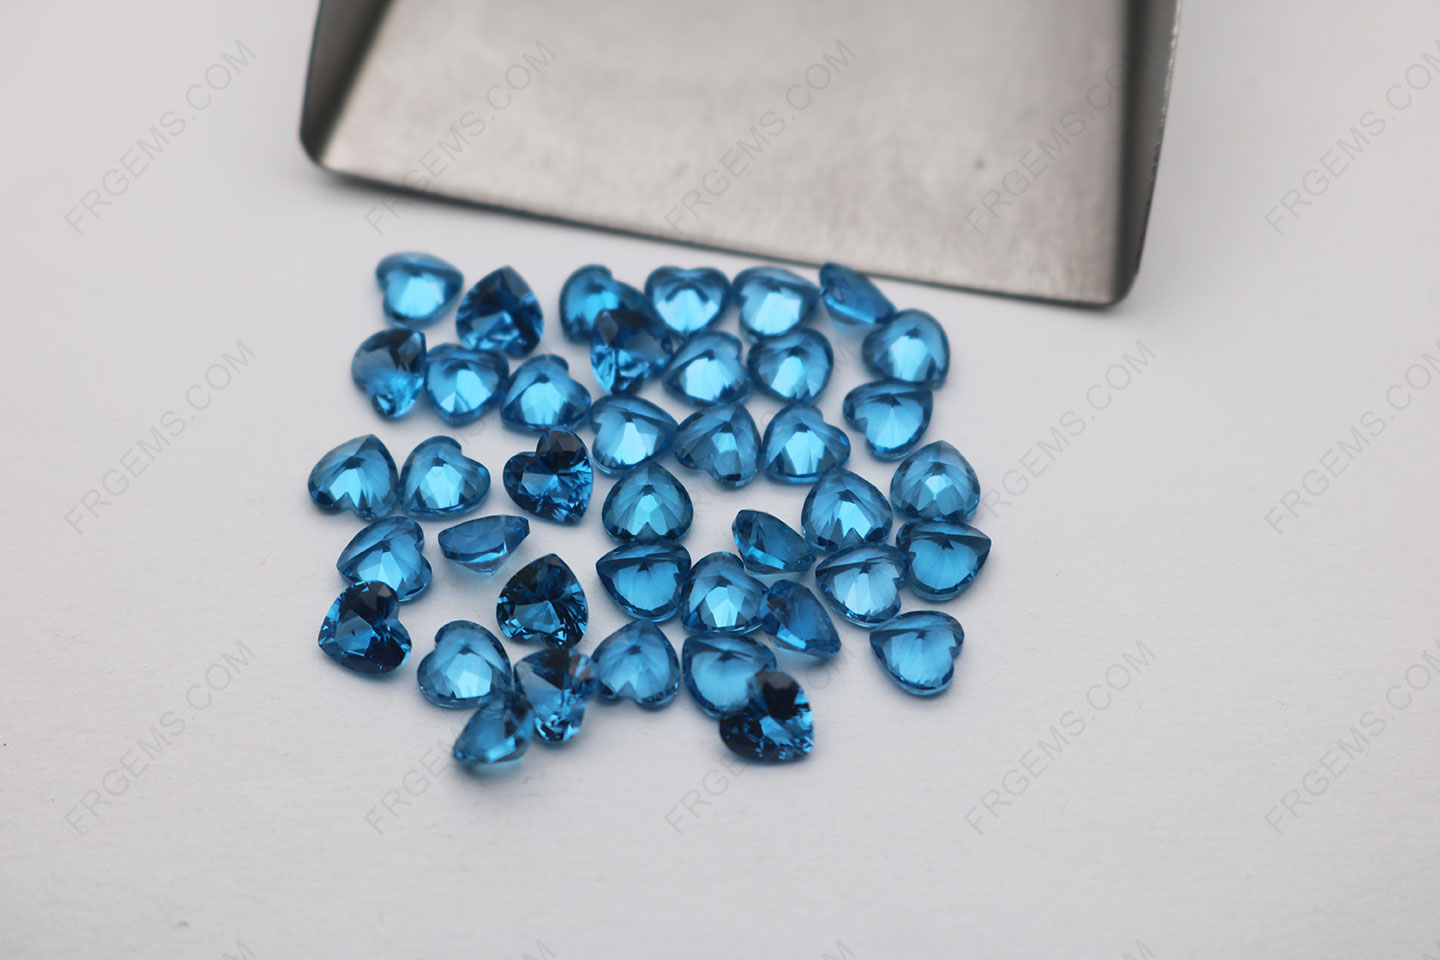 Synthetic Spinel Swiss blue 119# Color Heart shape Faceted cut 5x5mm Loose gemstones Suppliers in China